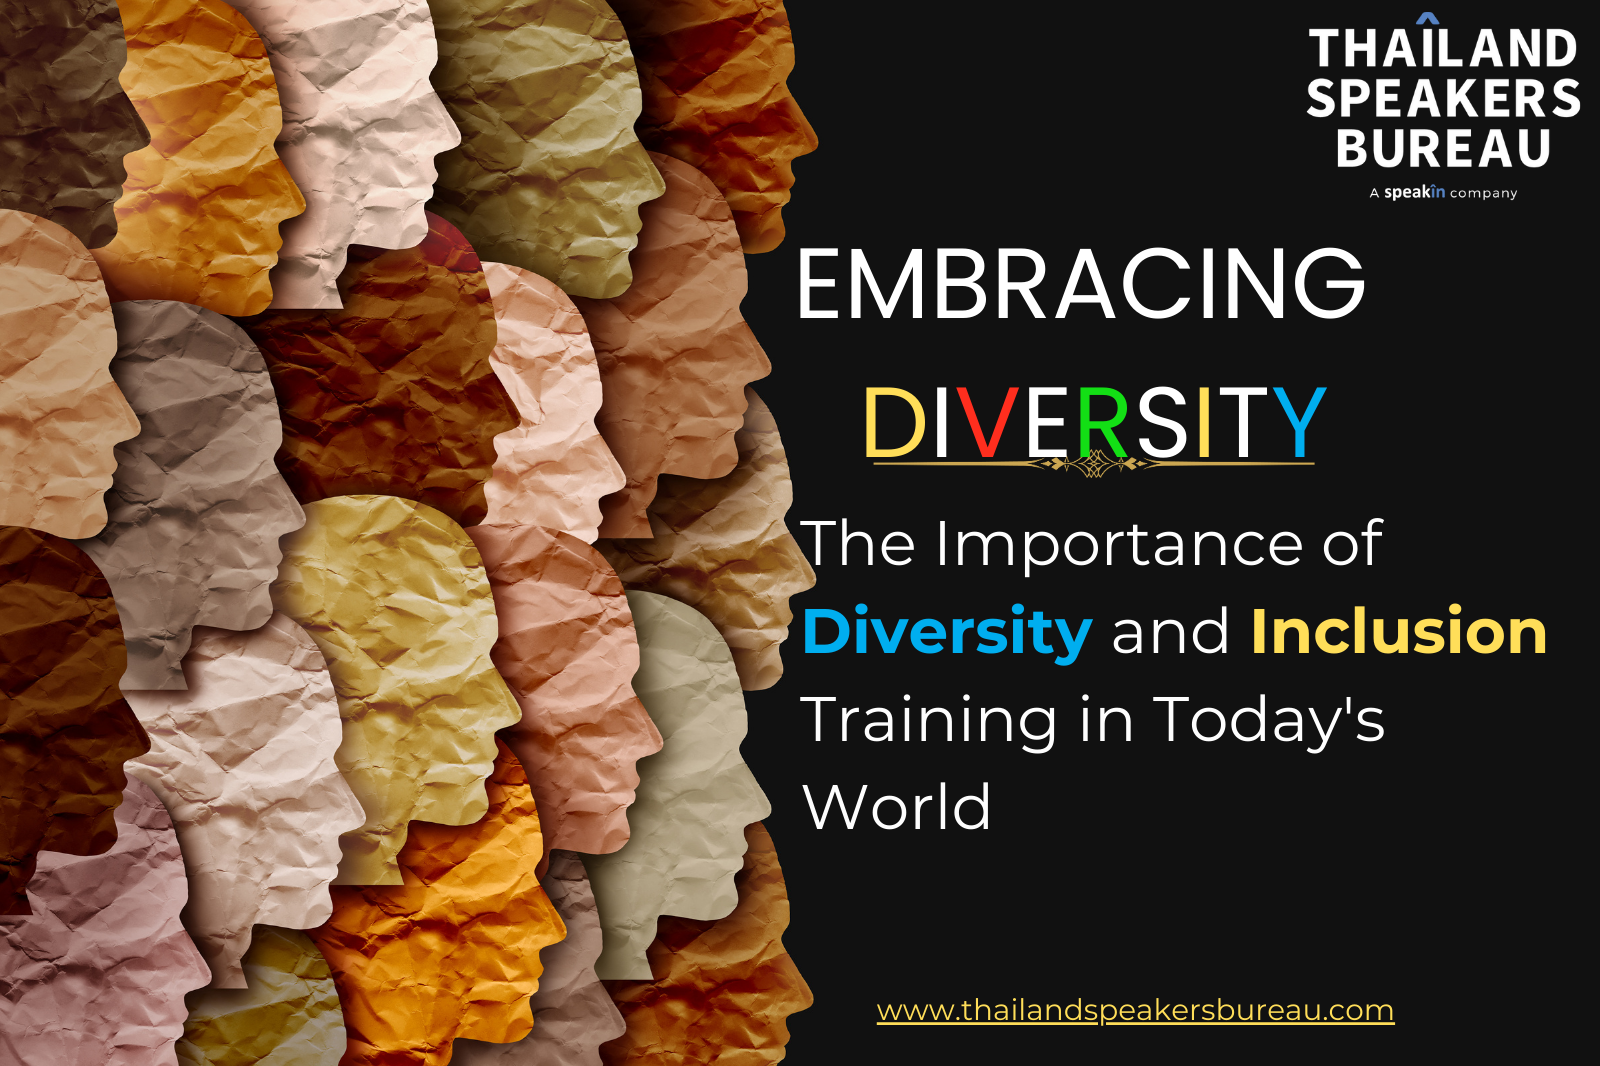 Embracing Diversity: The Importance of Diversity and Inclusion Training in Today's World